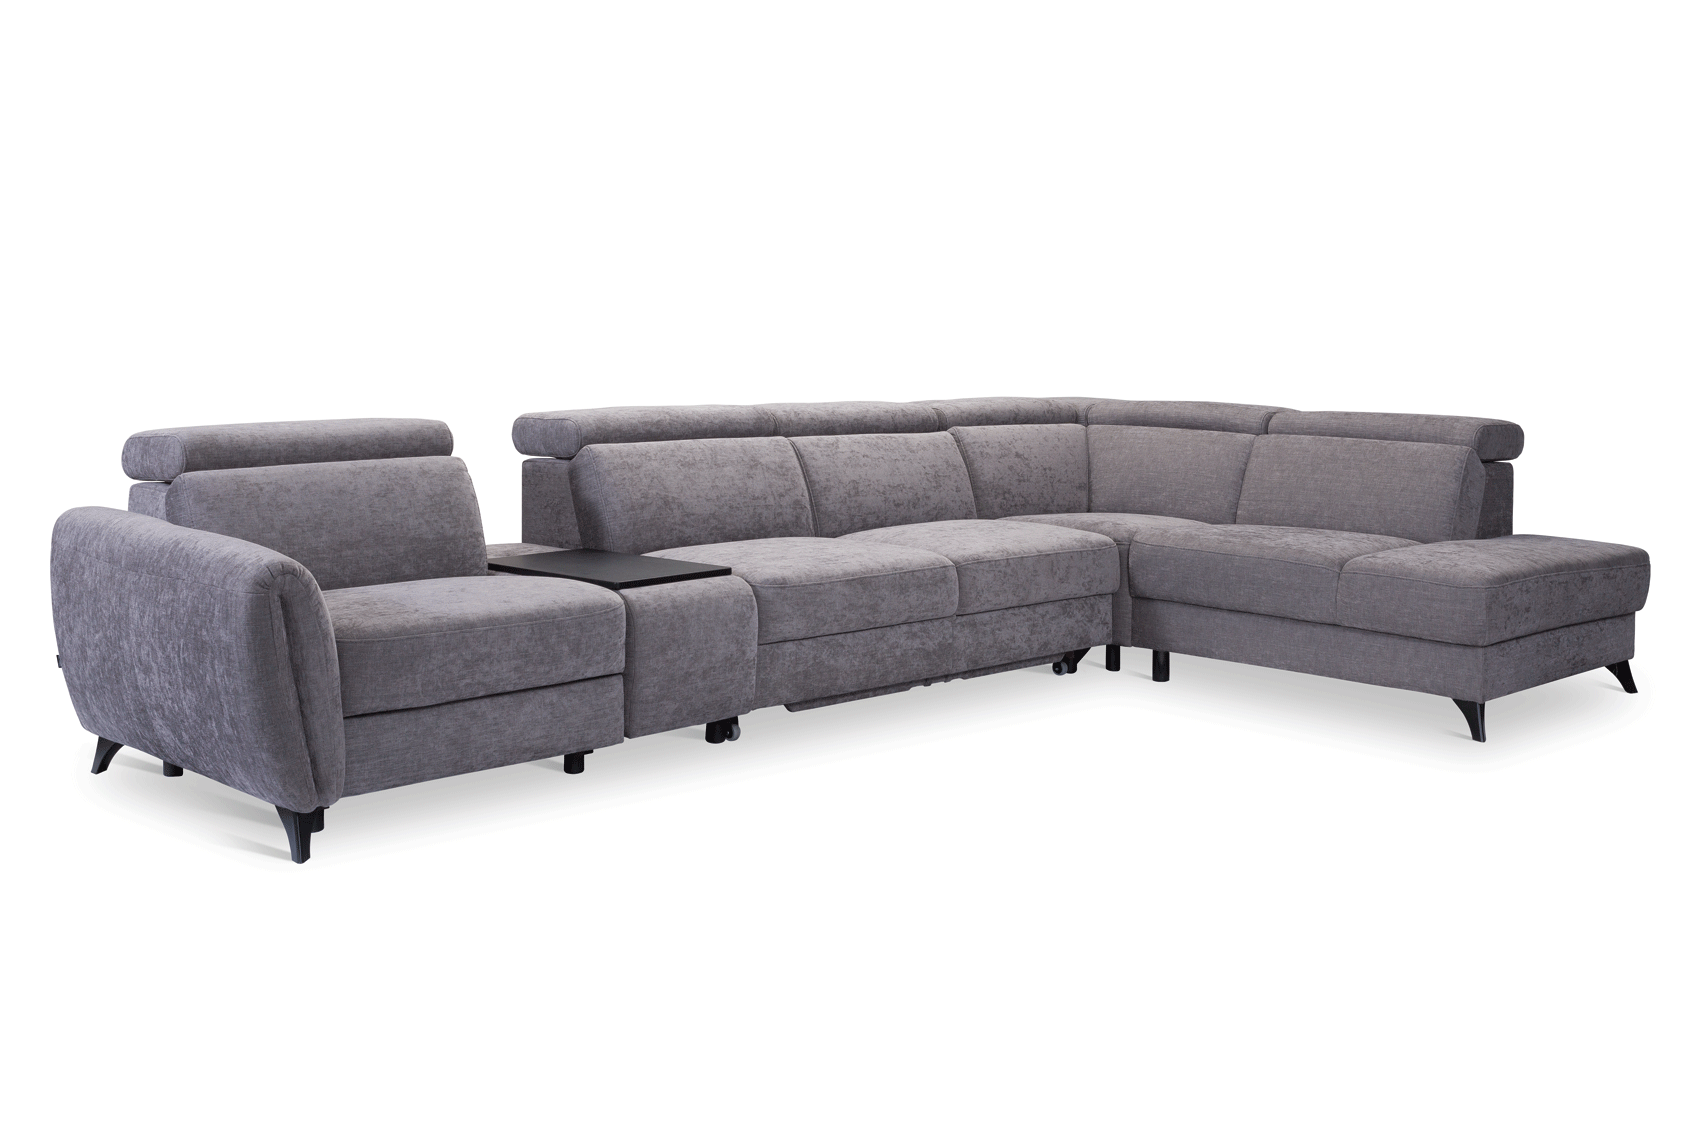 Living Room Furniture Reclining and Sliding Seats Sets Lorens Sectional w/recliner, bed, bar